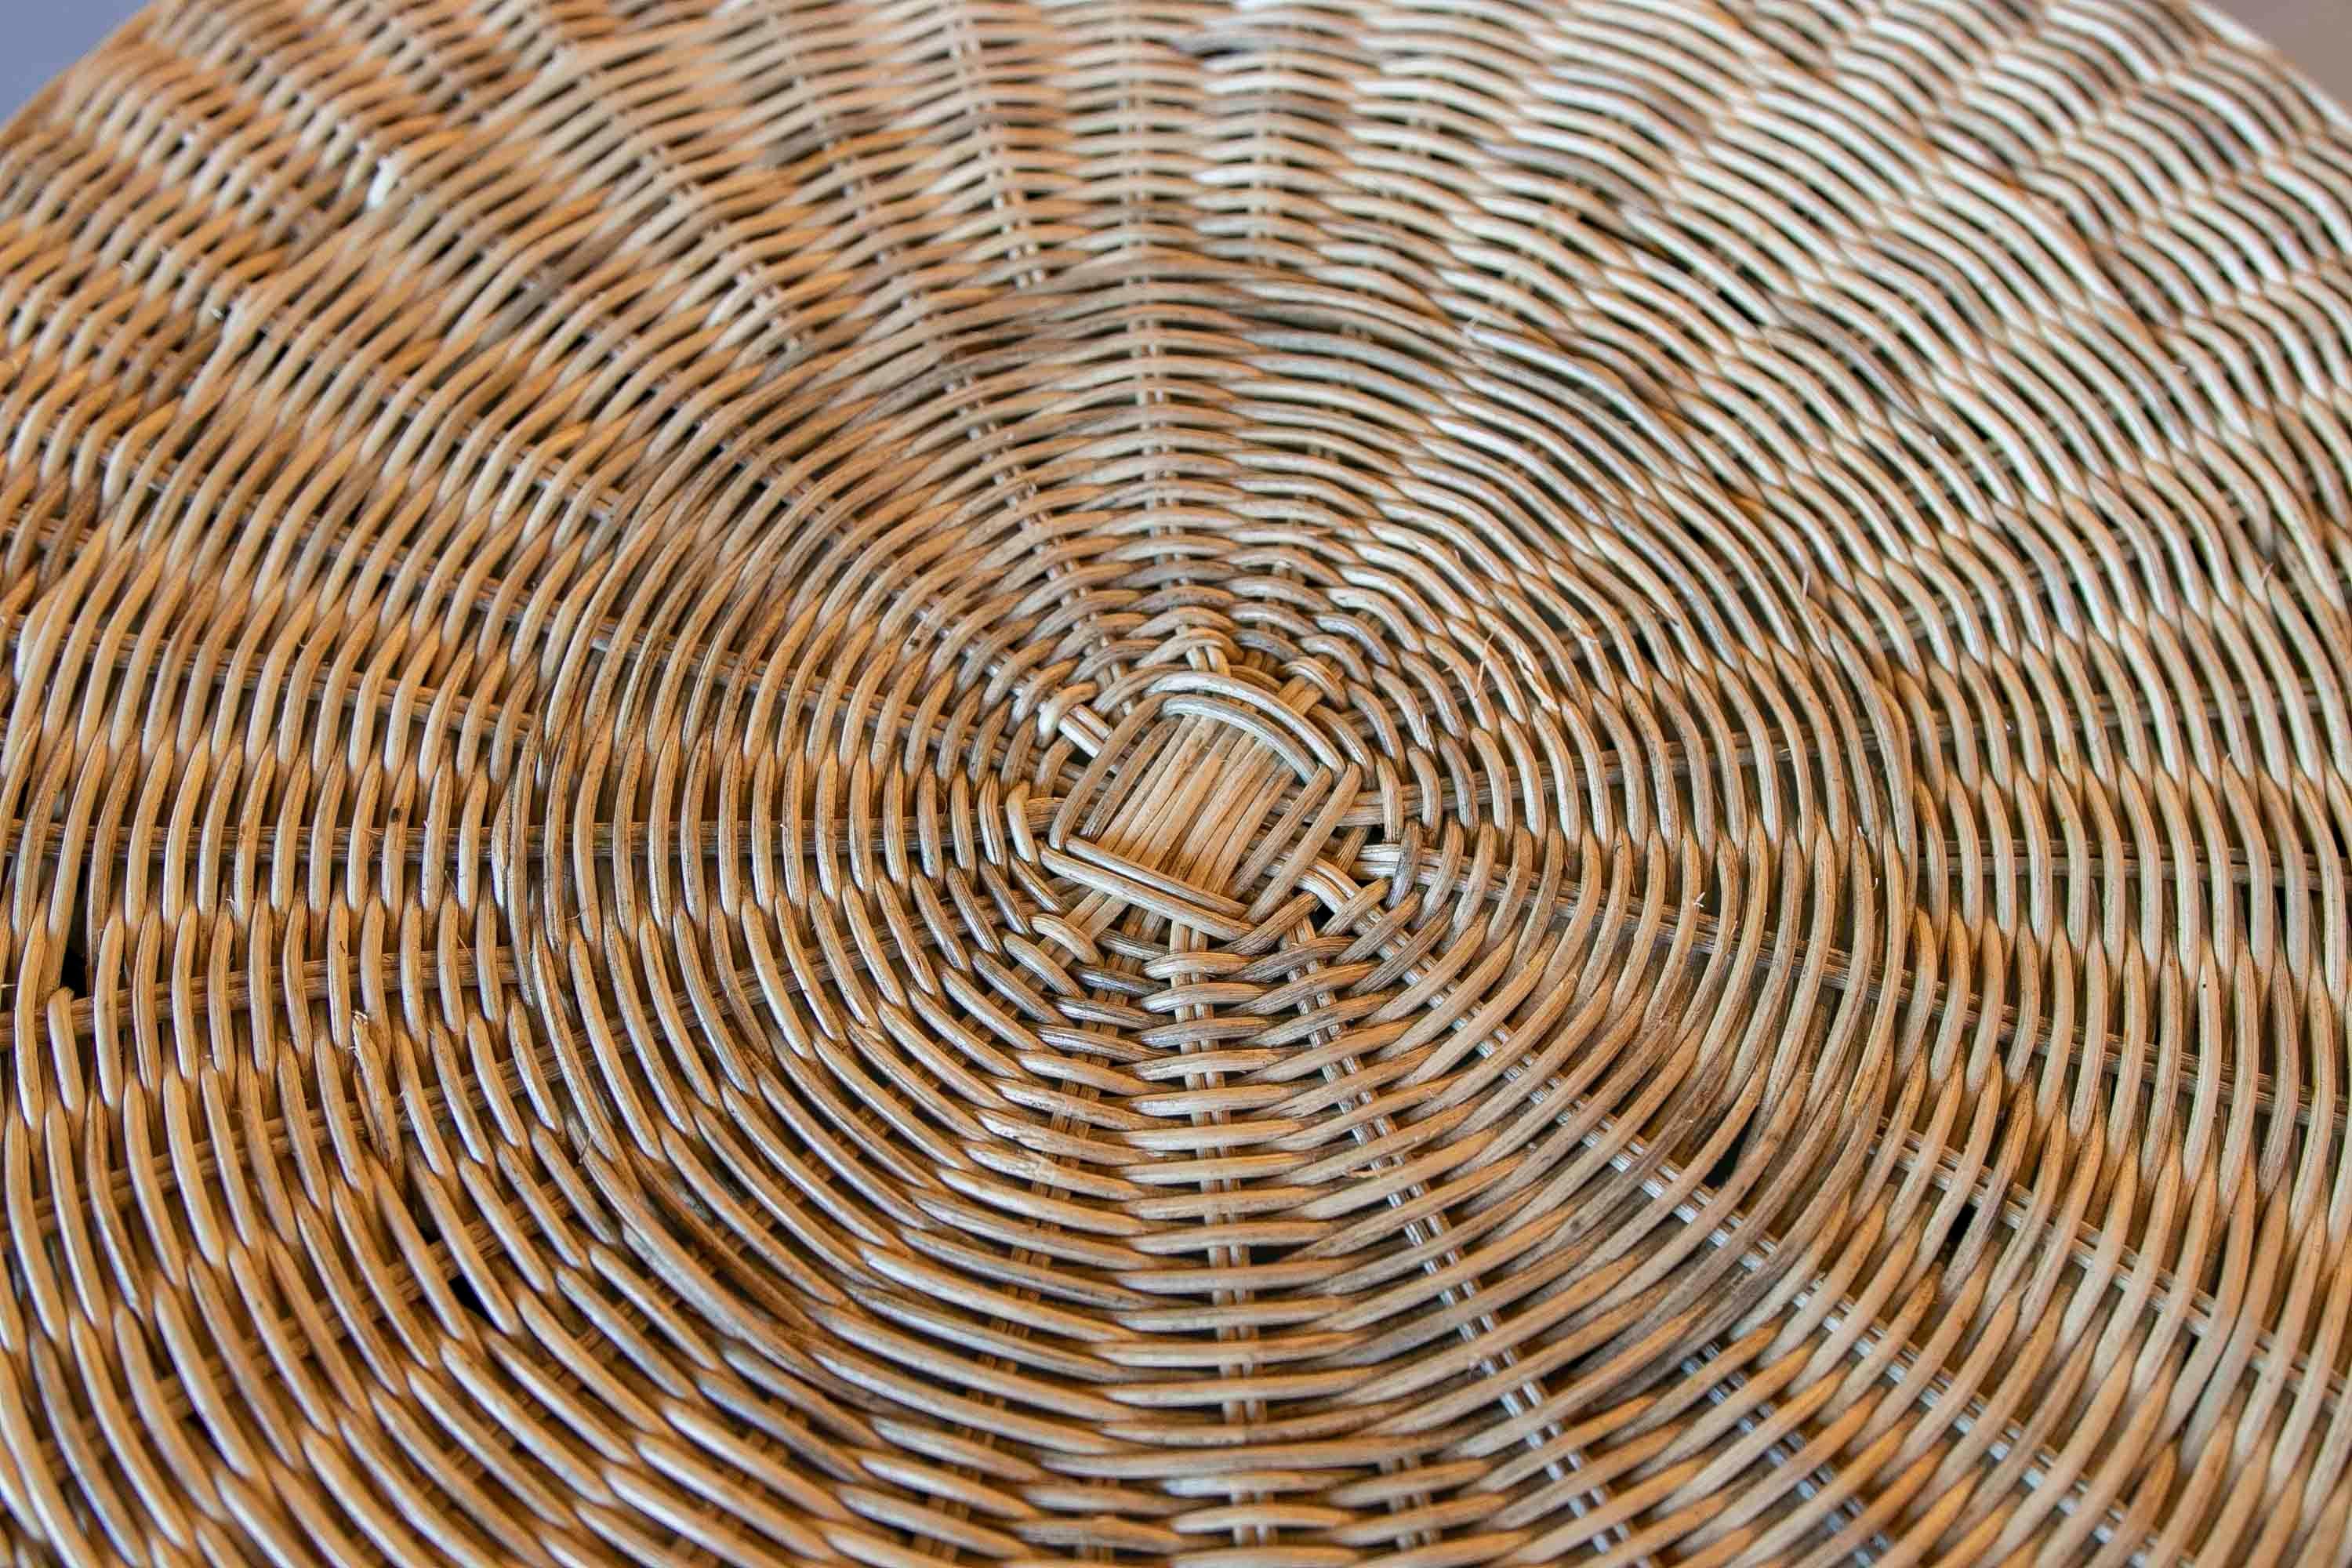 Handmade Round Wicker Side Table with Slings at the Bottom For Sale 5